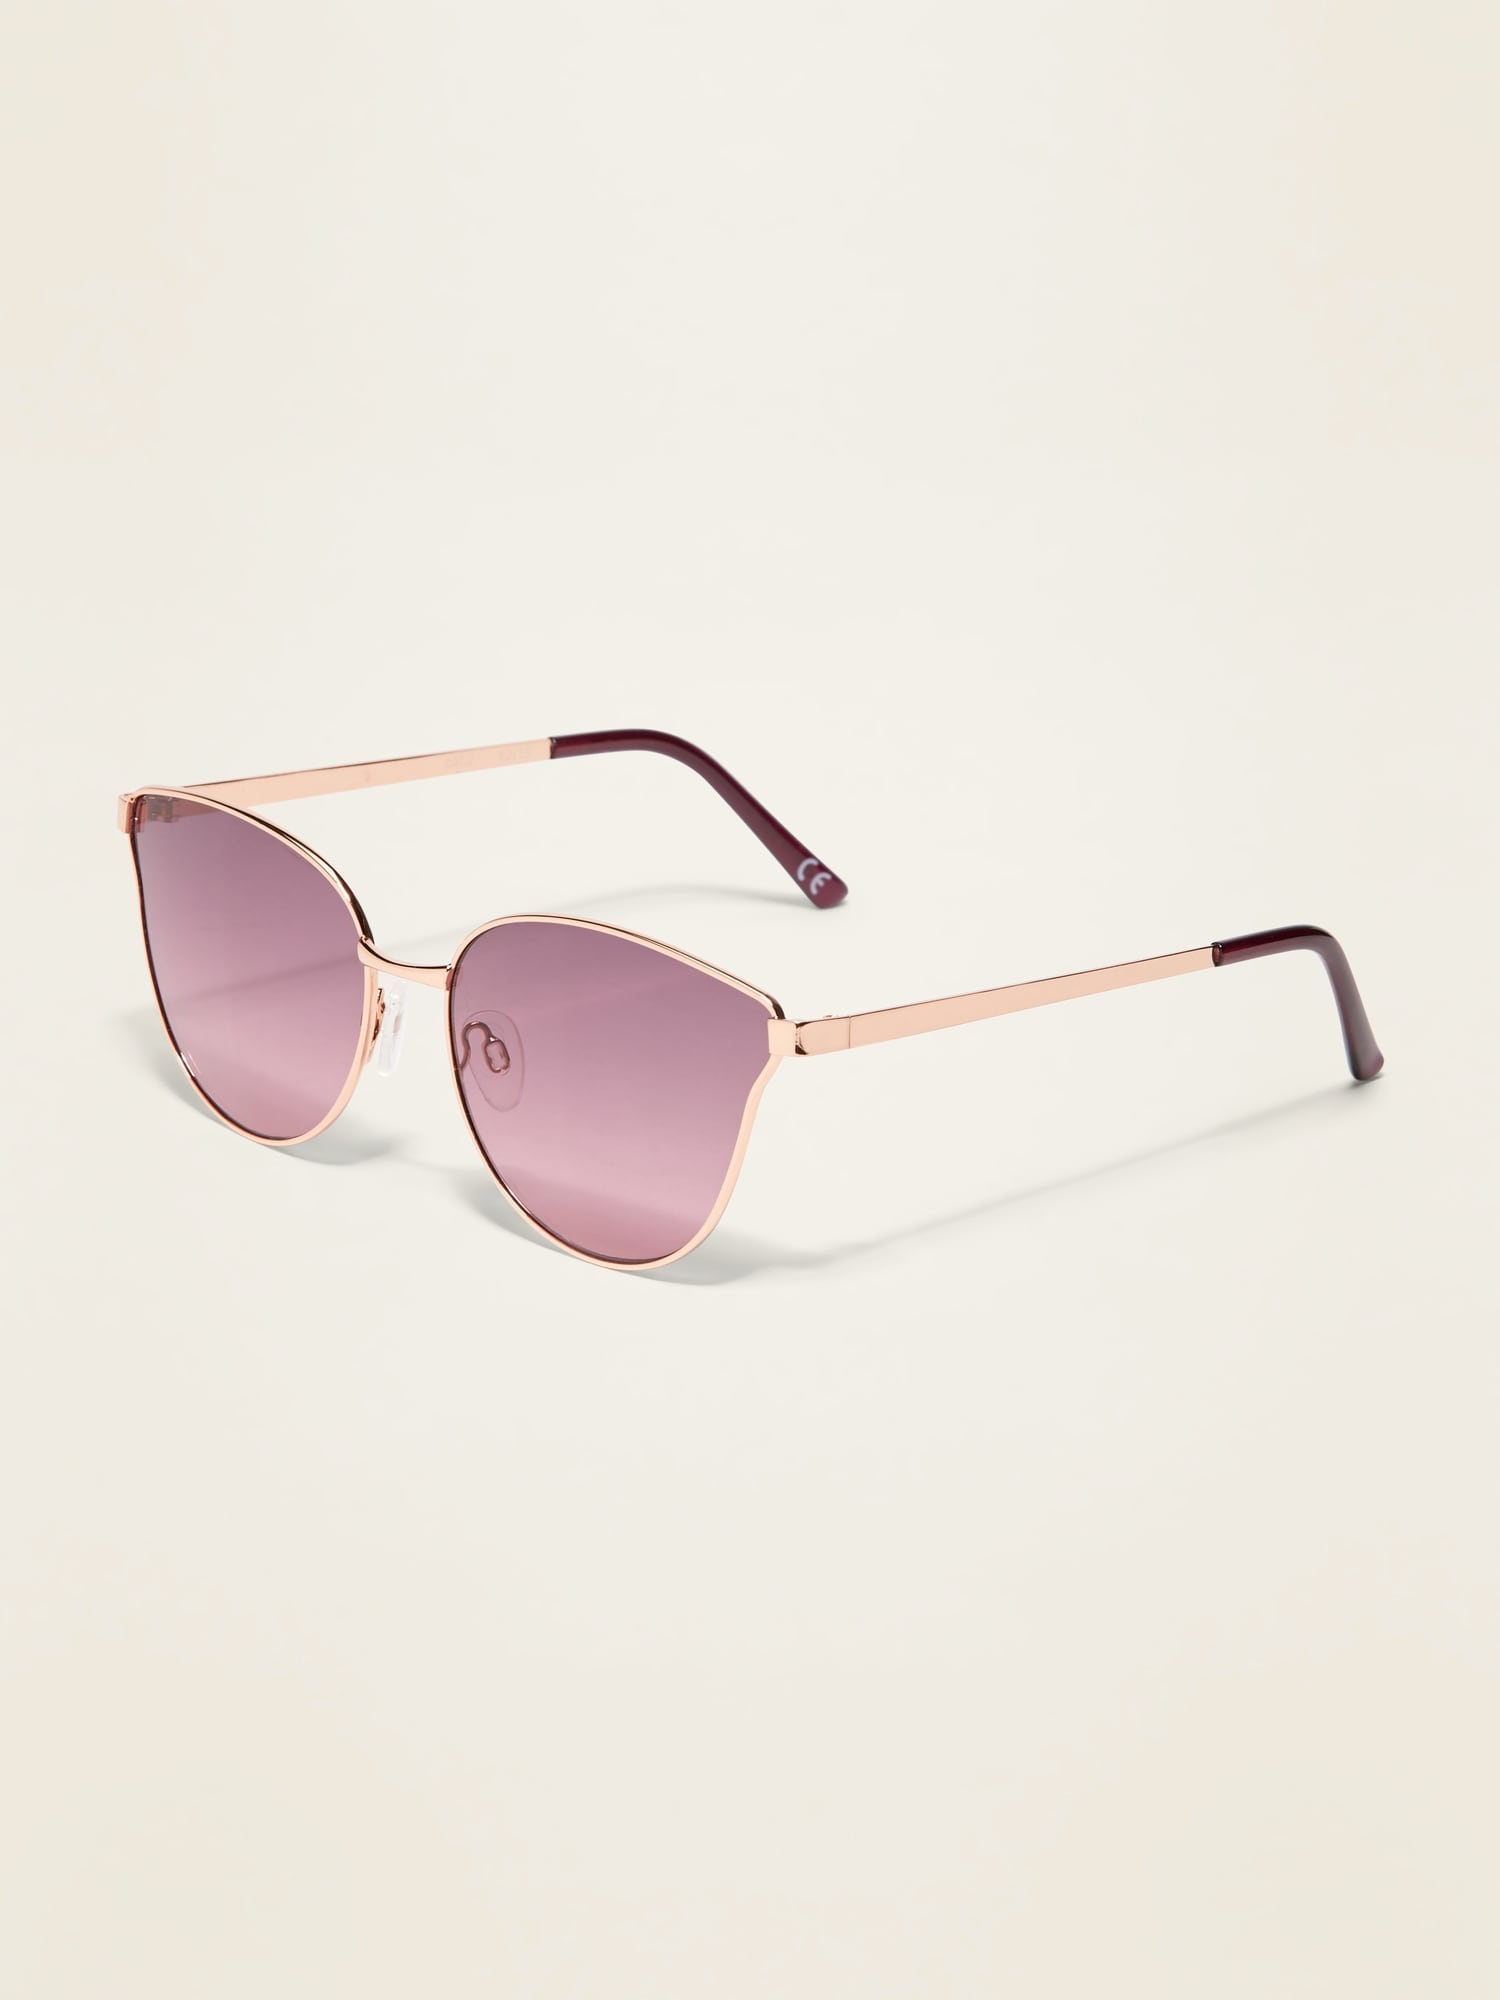 Best Sunglasses For Women From Old Navy | POPSUGAR Fashion